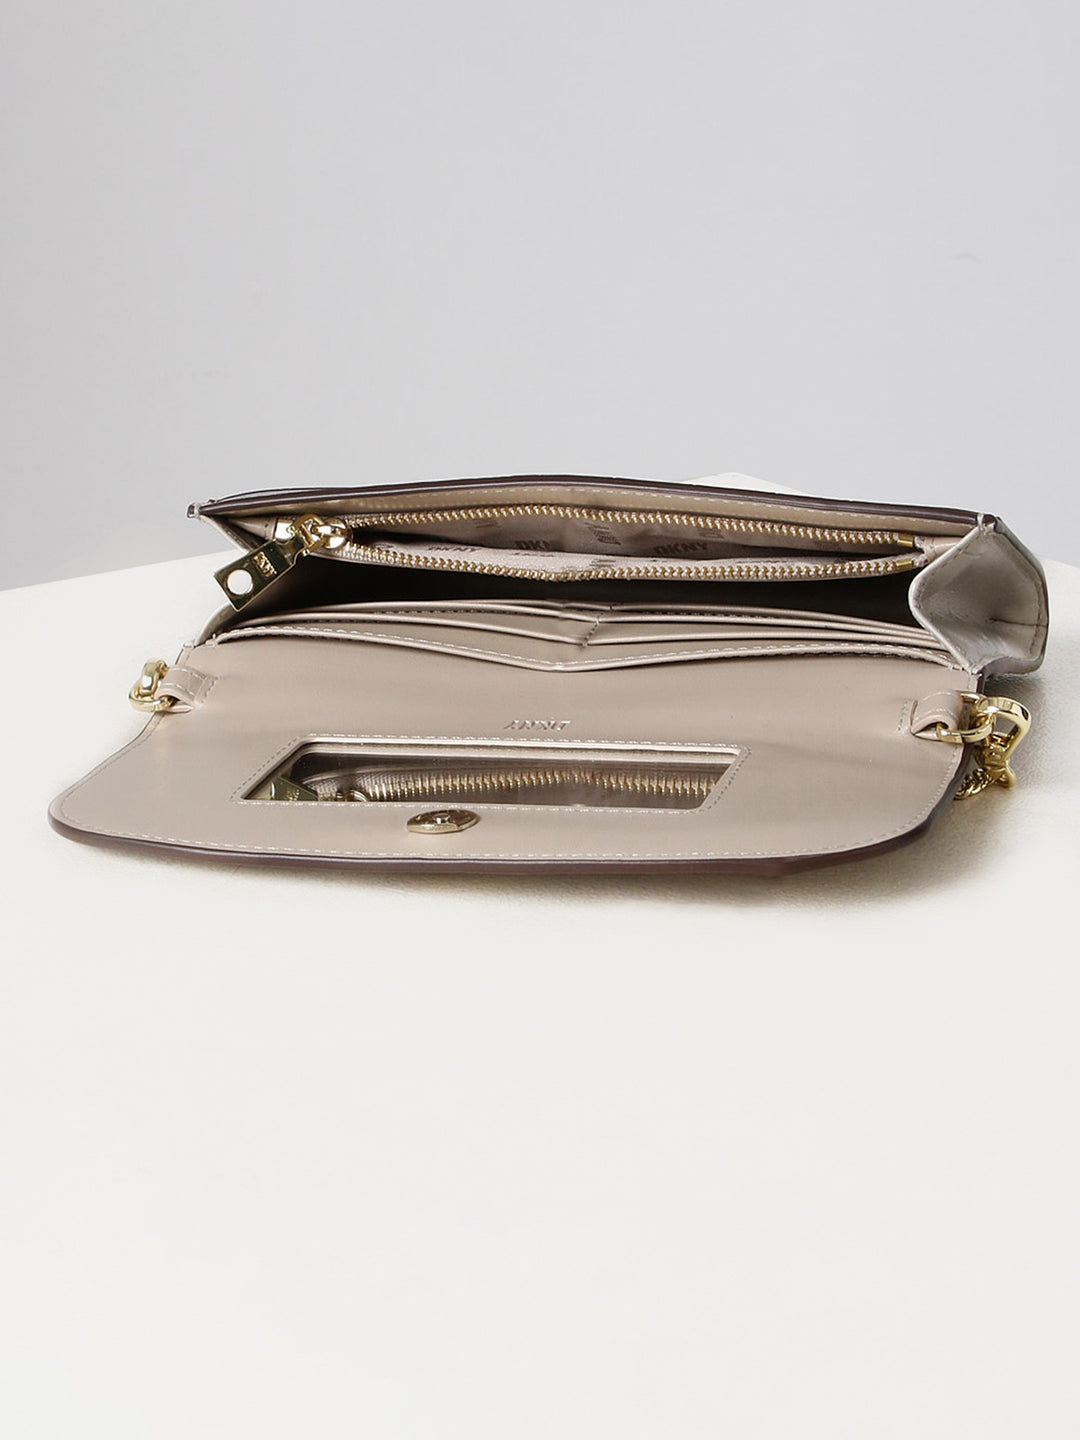 DKNY Bryant Park Leather Small Zip Around Purse, Sand